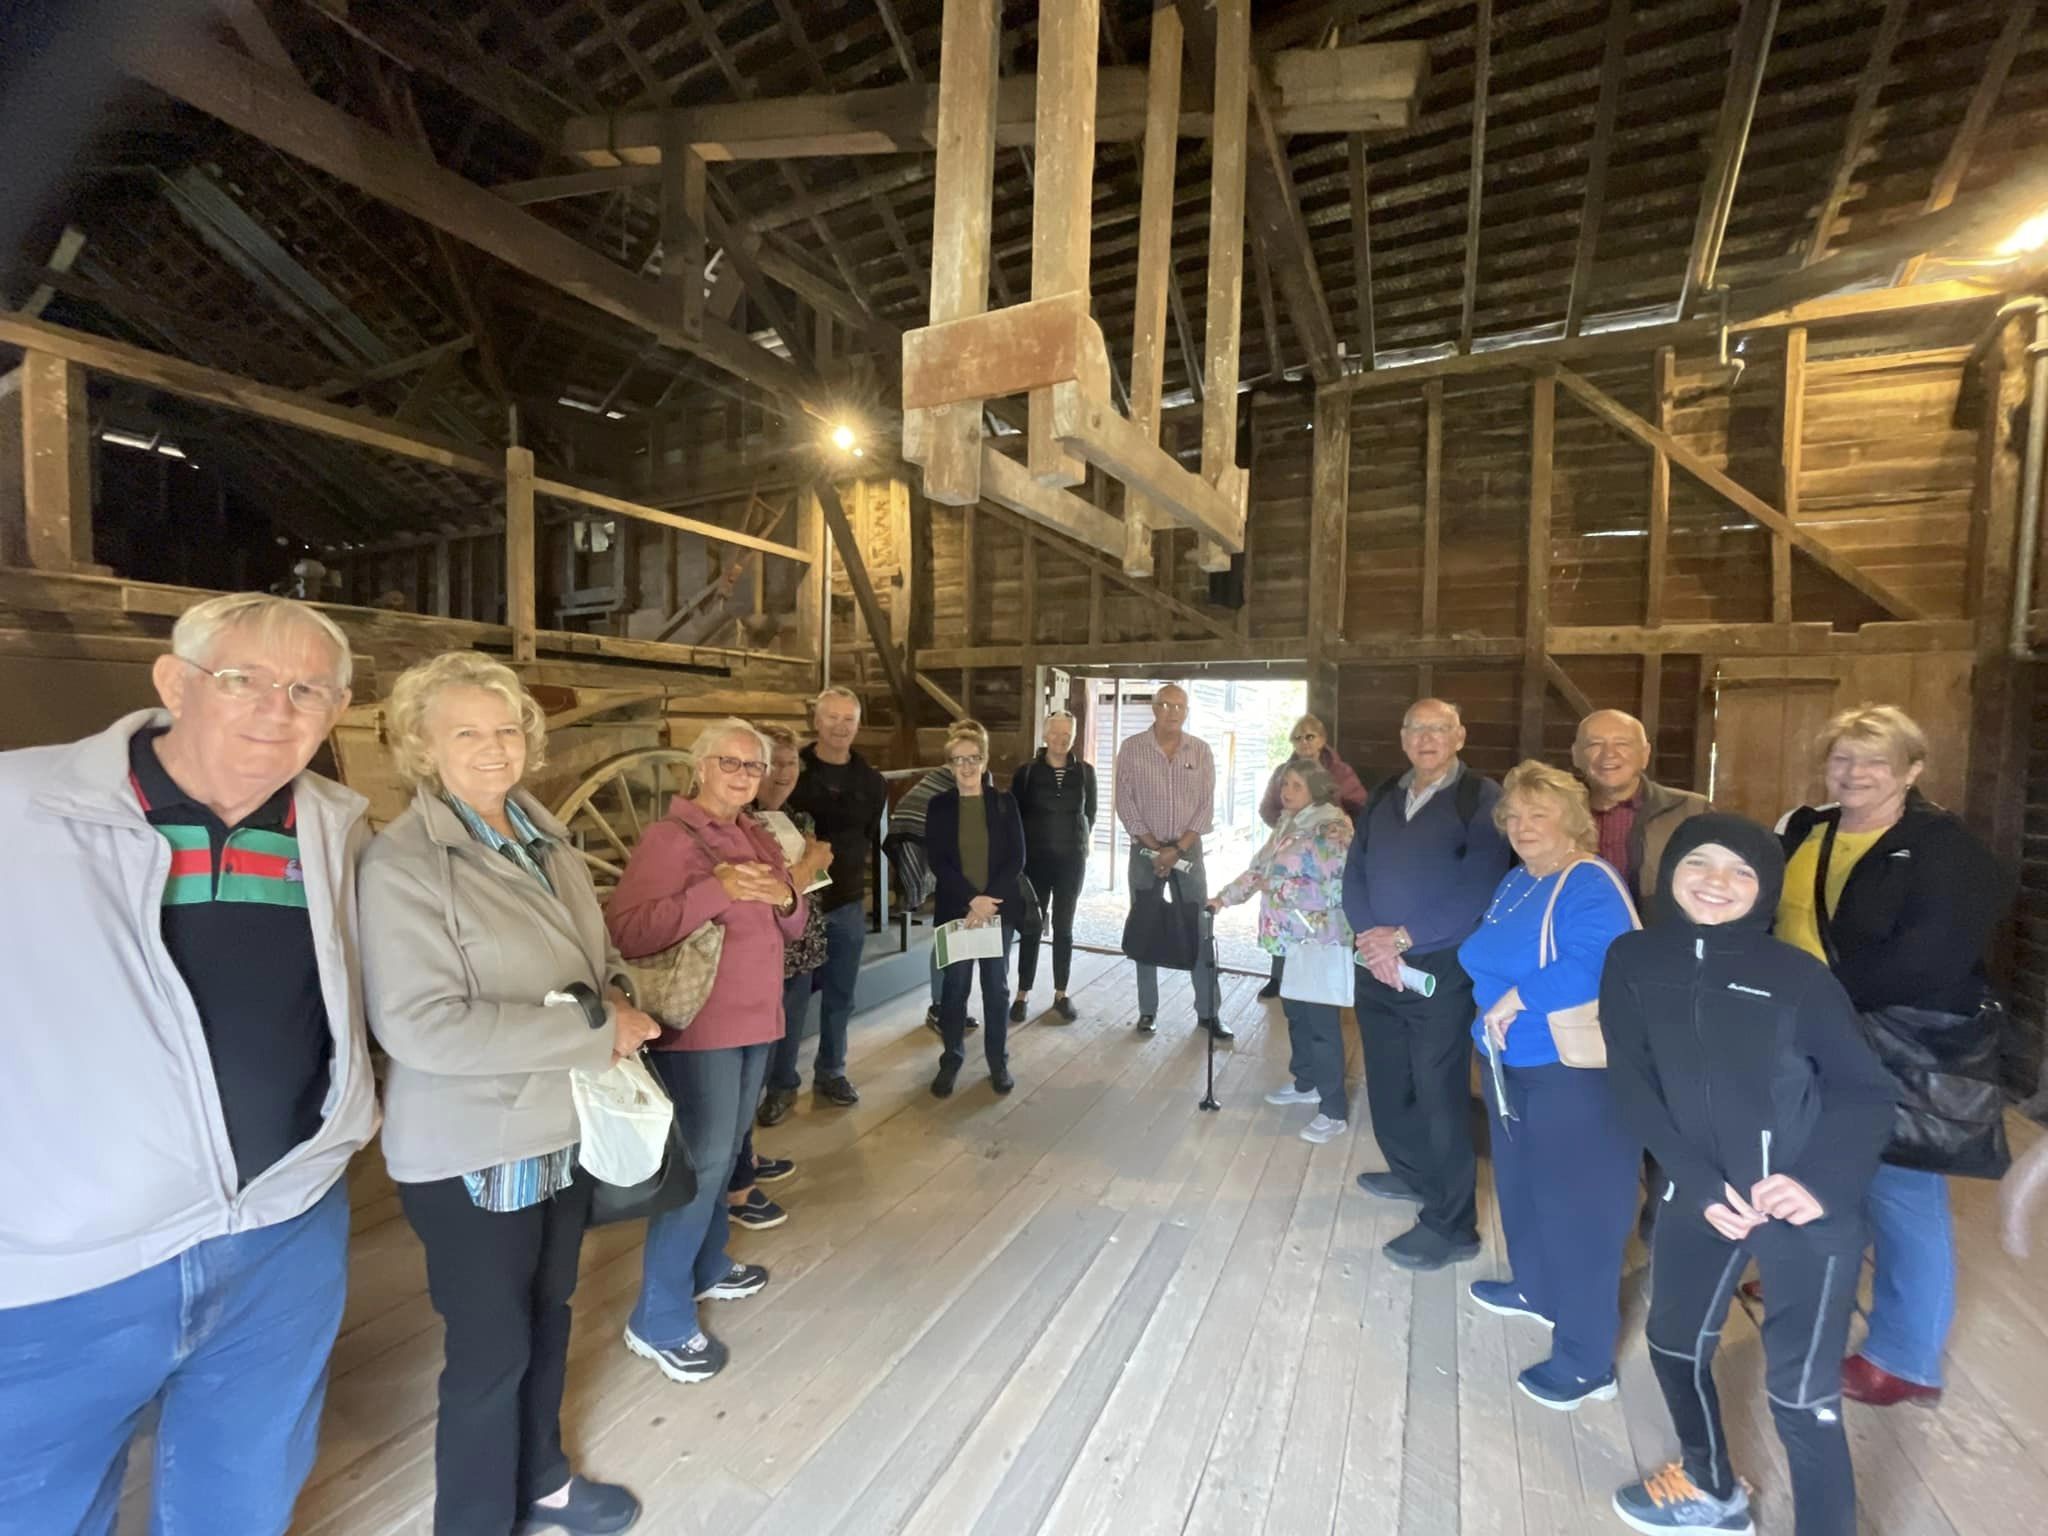 Tour group in the stable